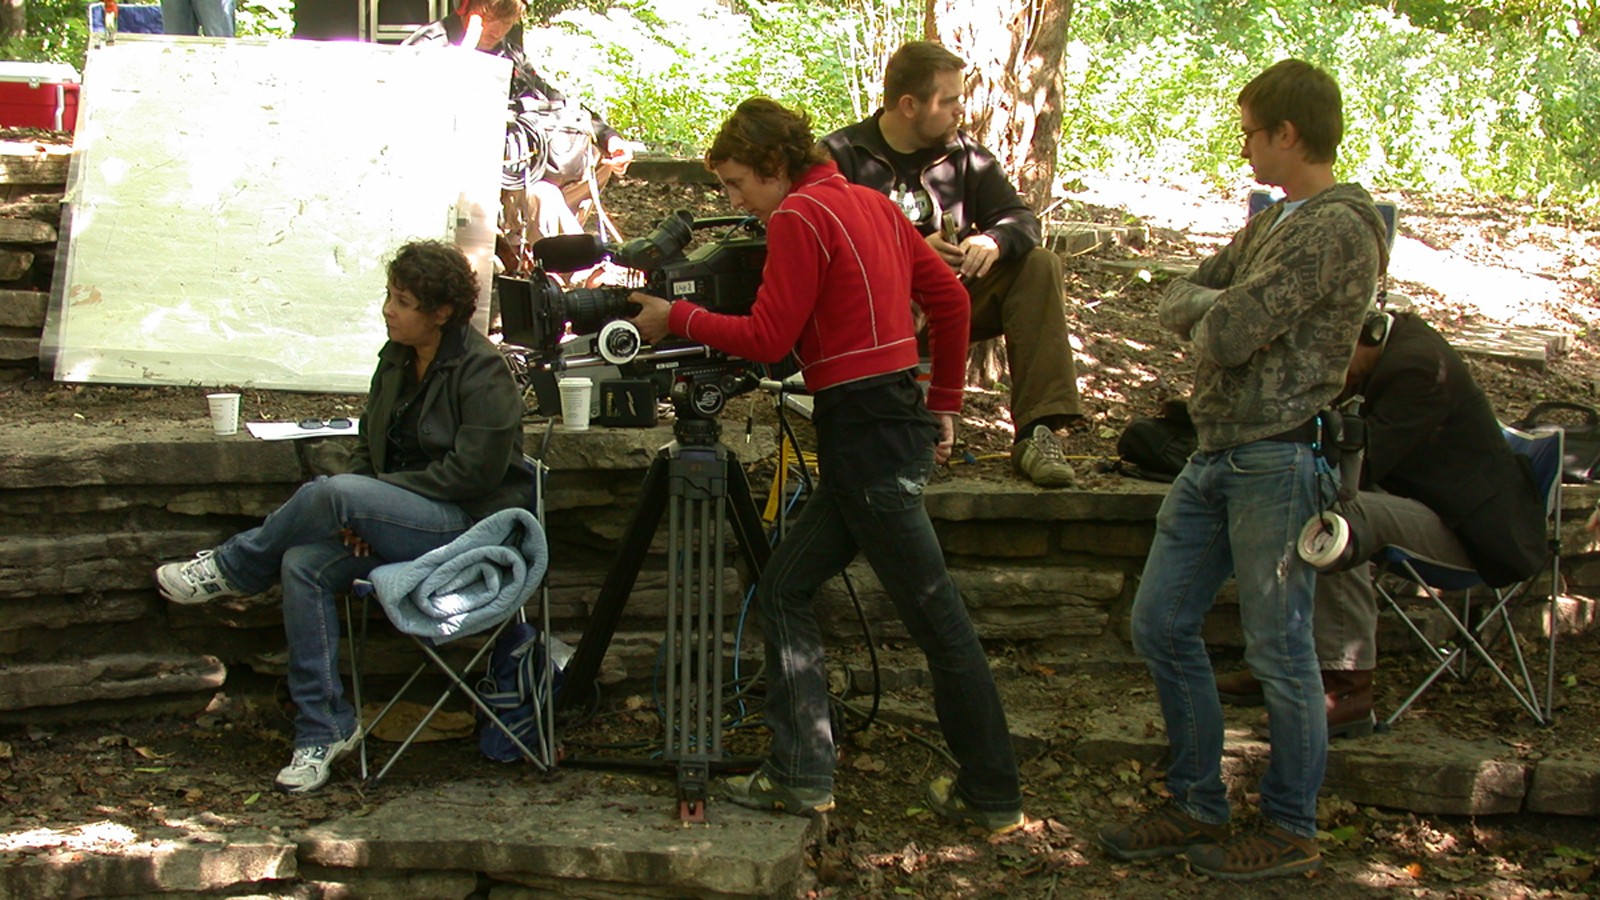 Filming in Columbus Park, Chicago, IL - Photo courtesy Carey Lundin